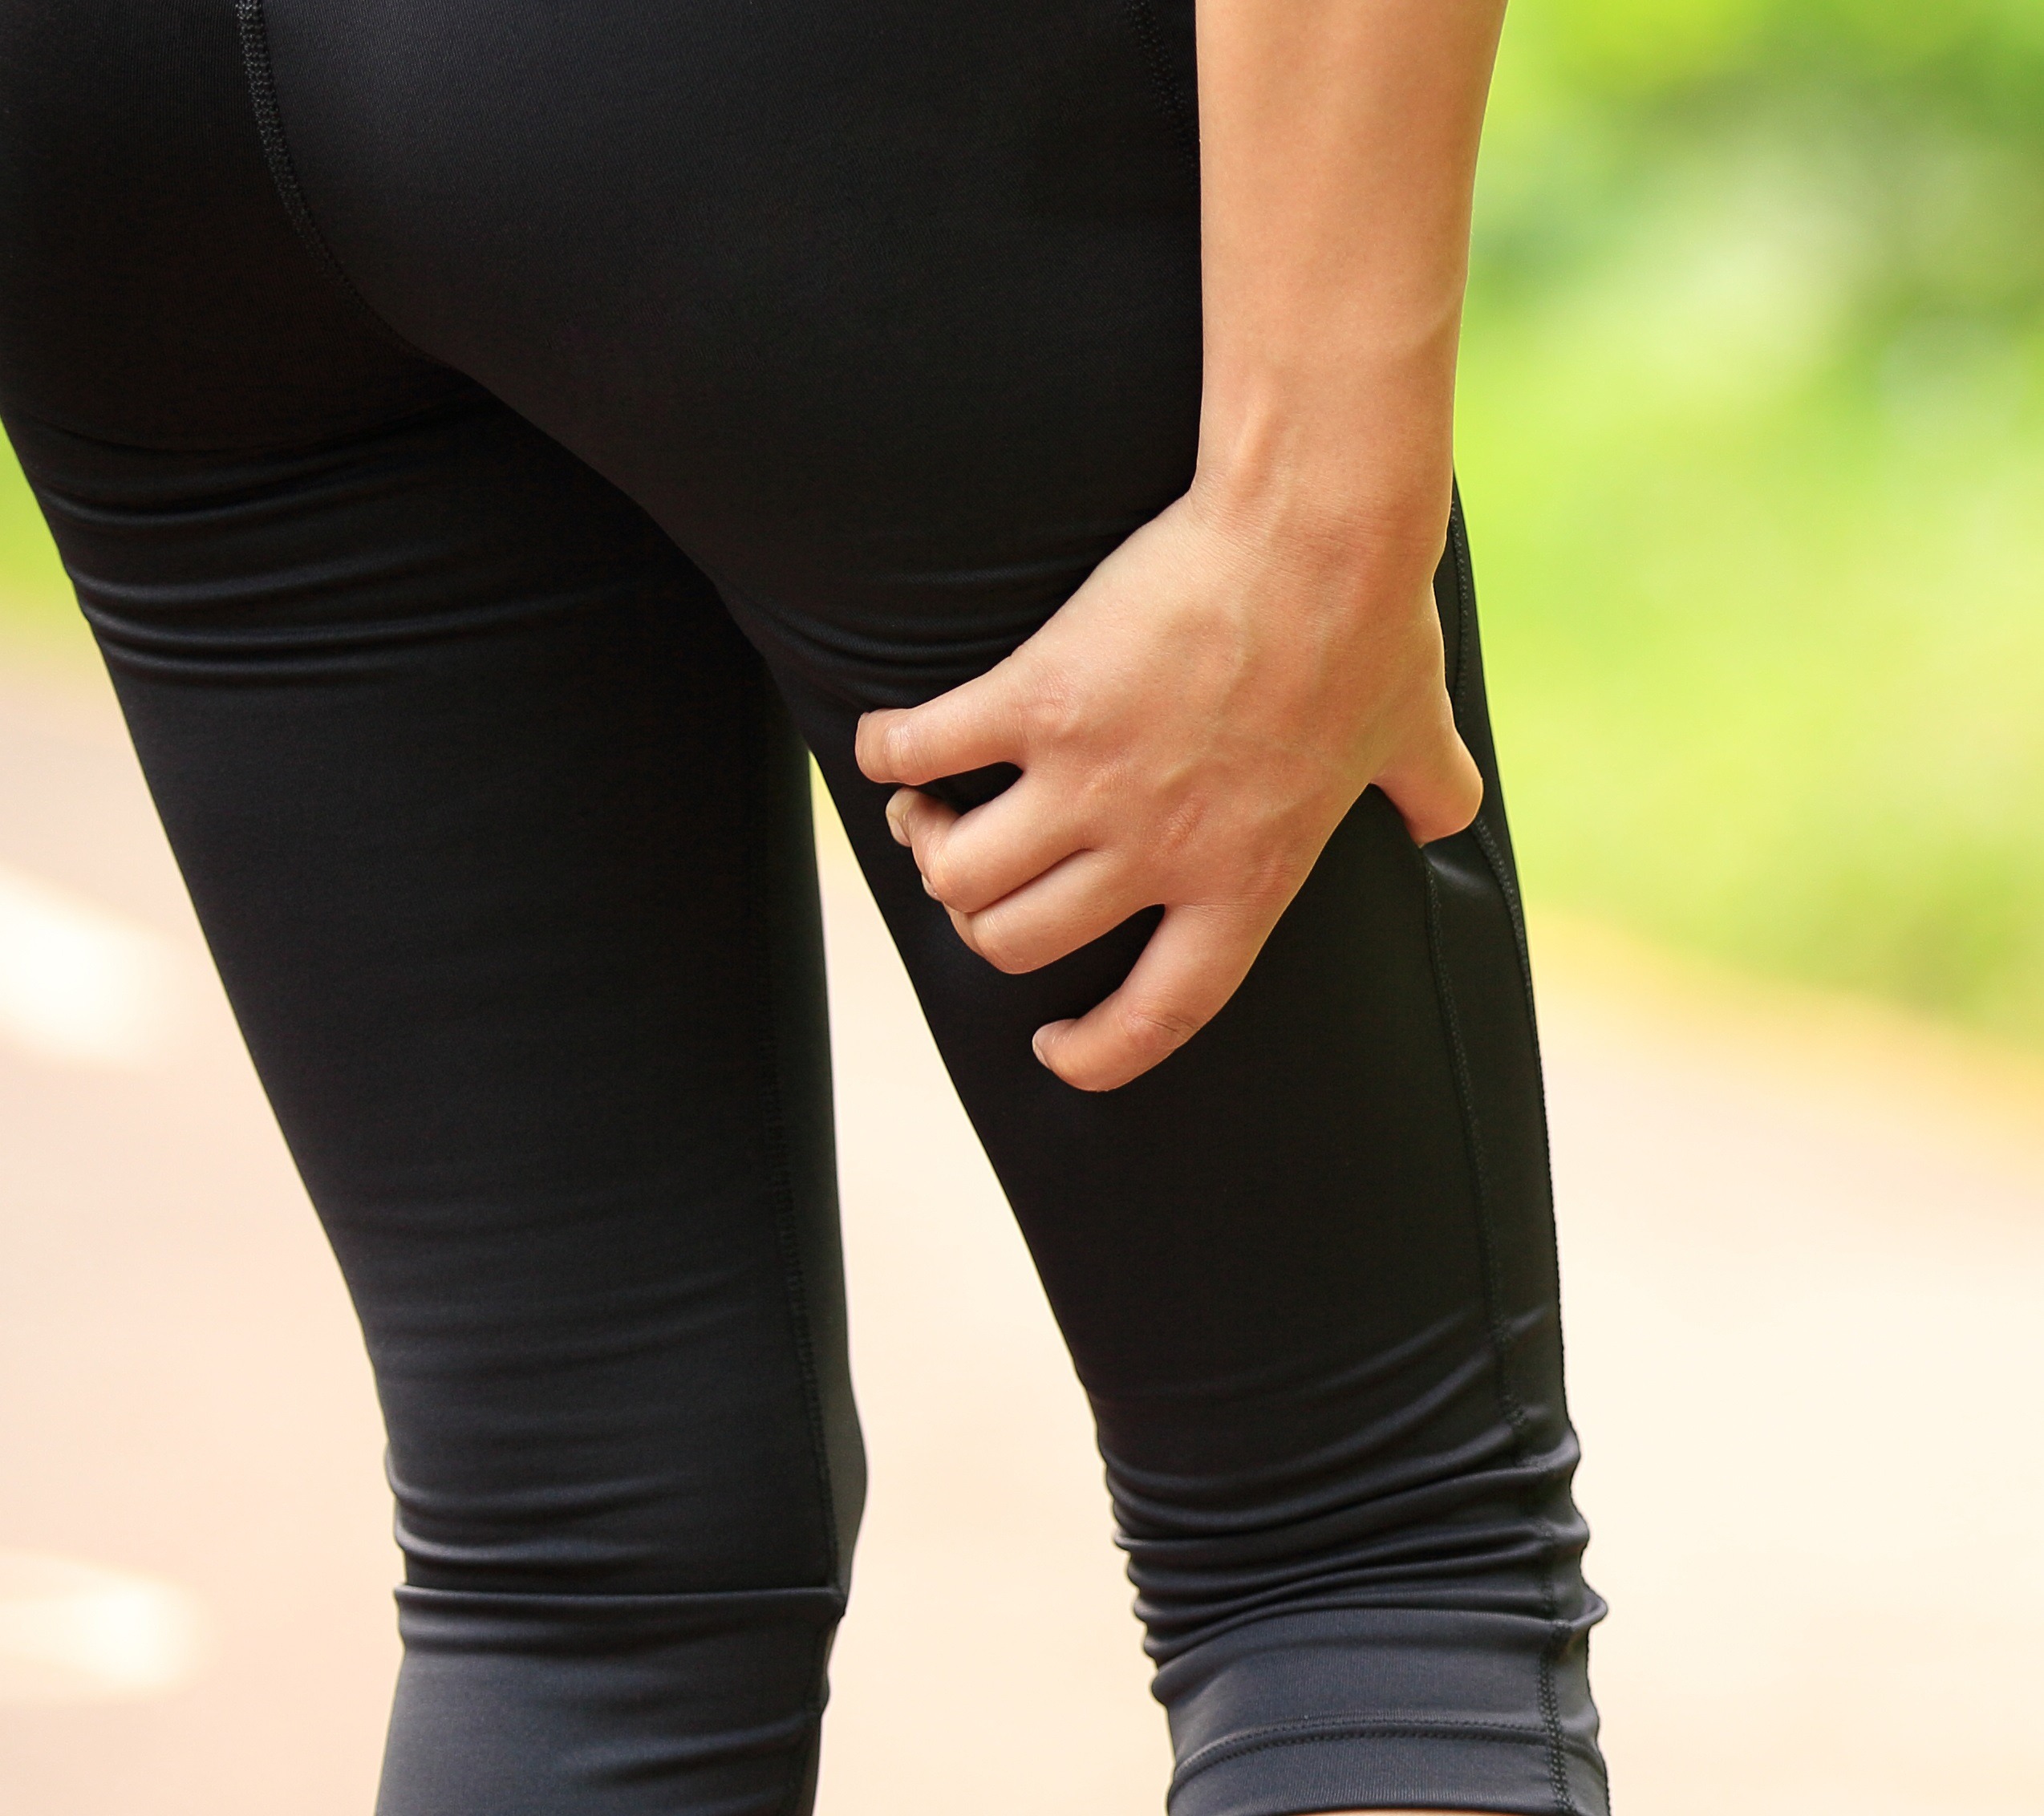 Jeggings And Tight Jeans Can Cause Meralgia Paresthetica | HuffPost Life